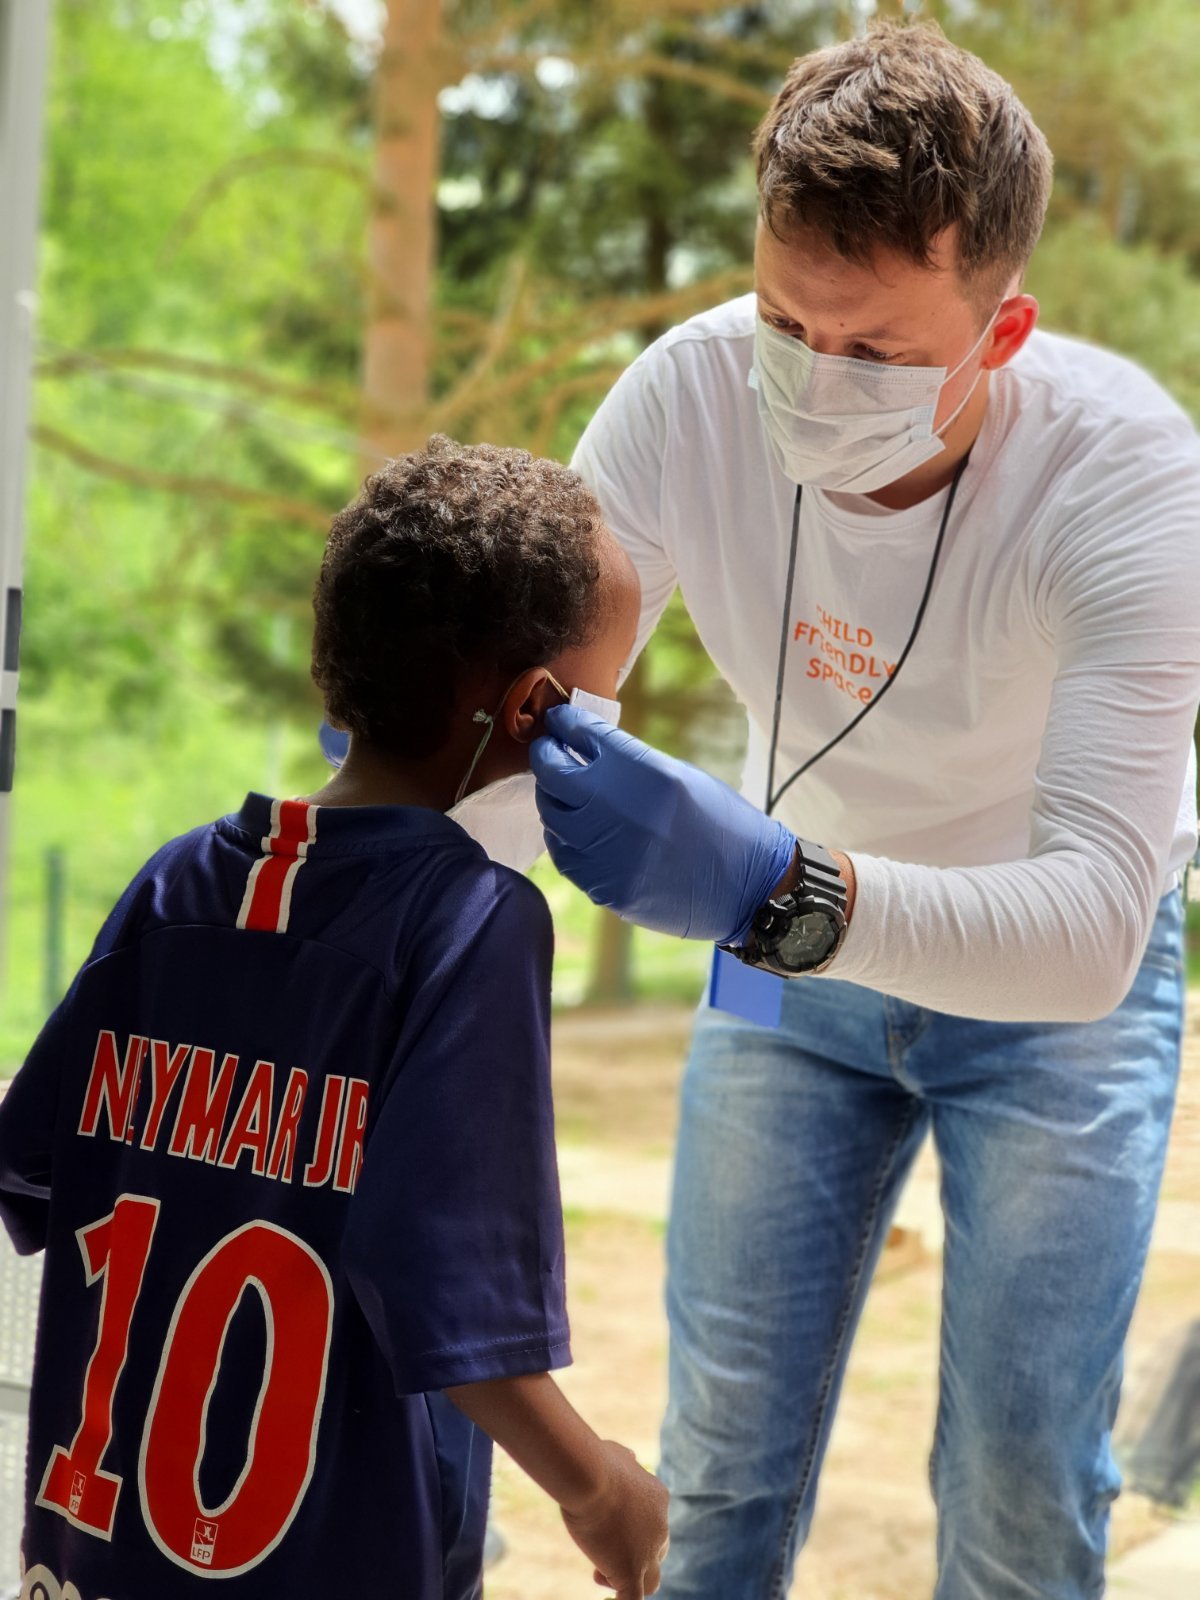 Muamer is helping a child fit the protective mask